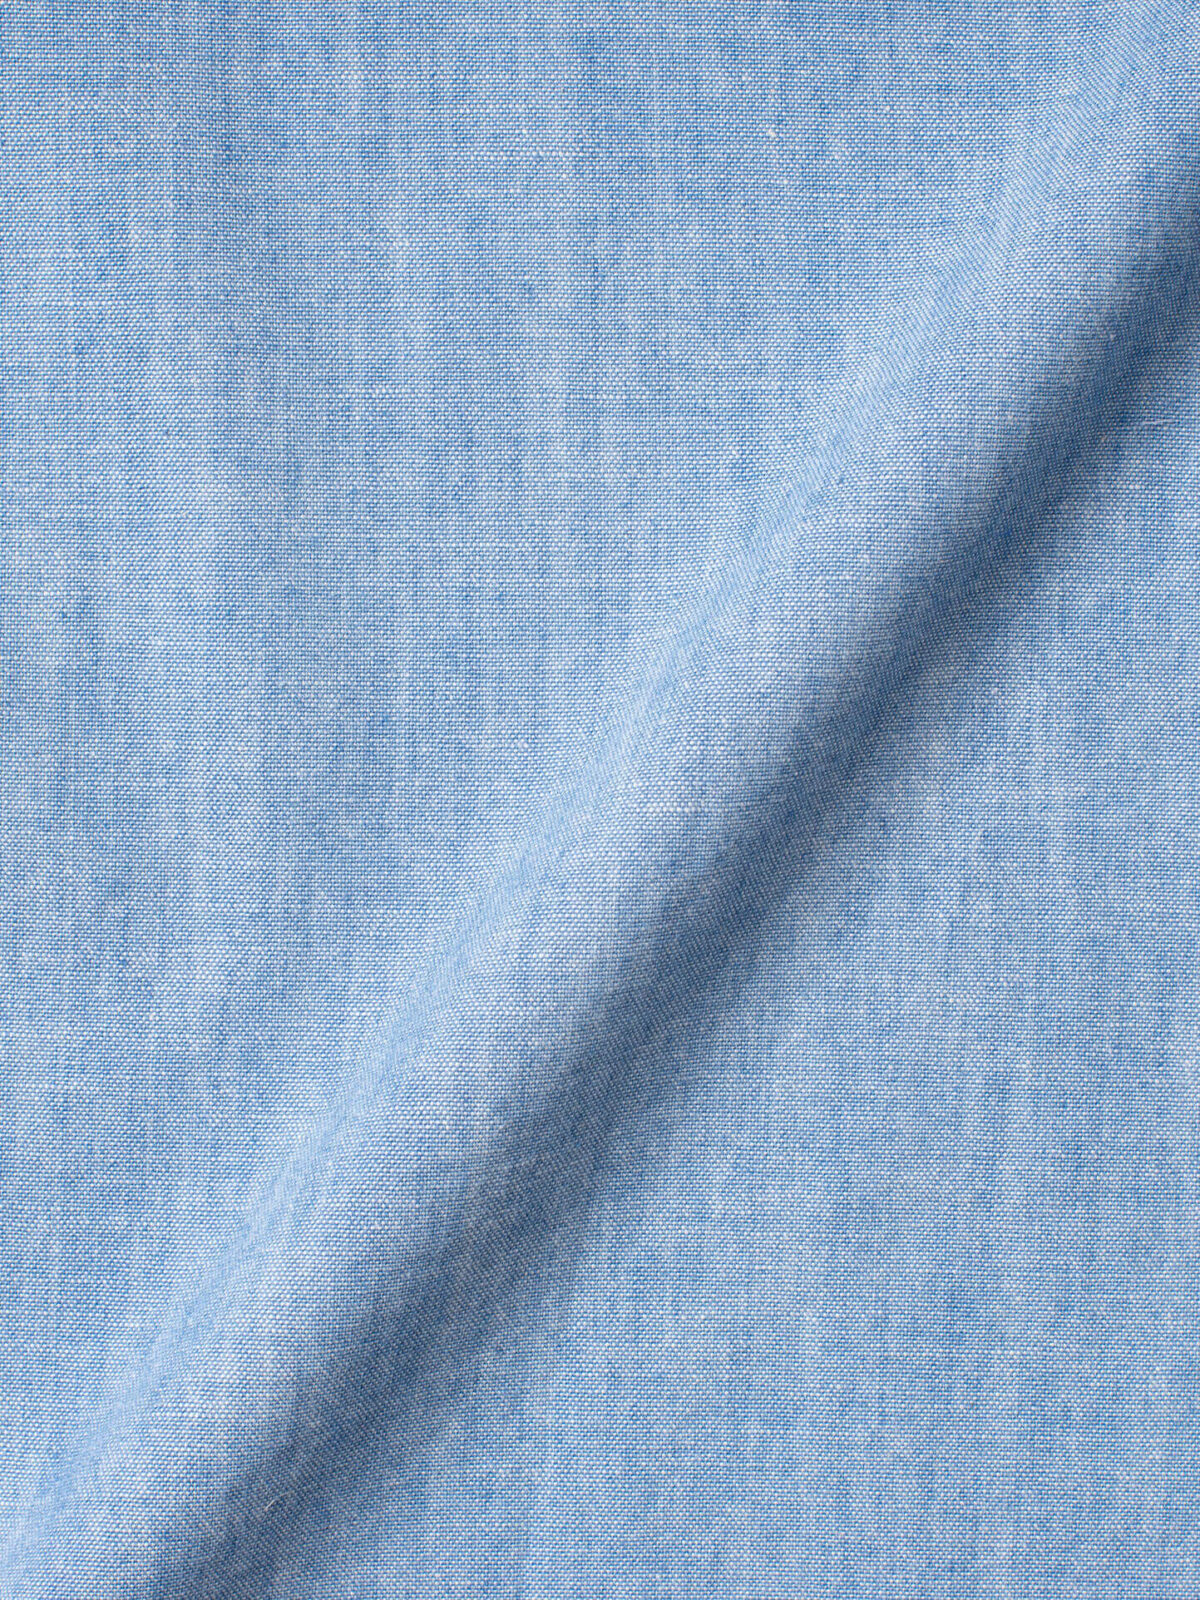 Moda Chambray in Indigo 12051-13 - Fabric Sold By Half Yard Increments and  Cut Continuously